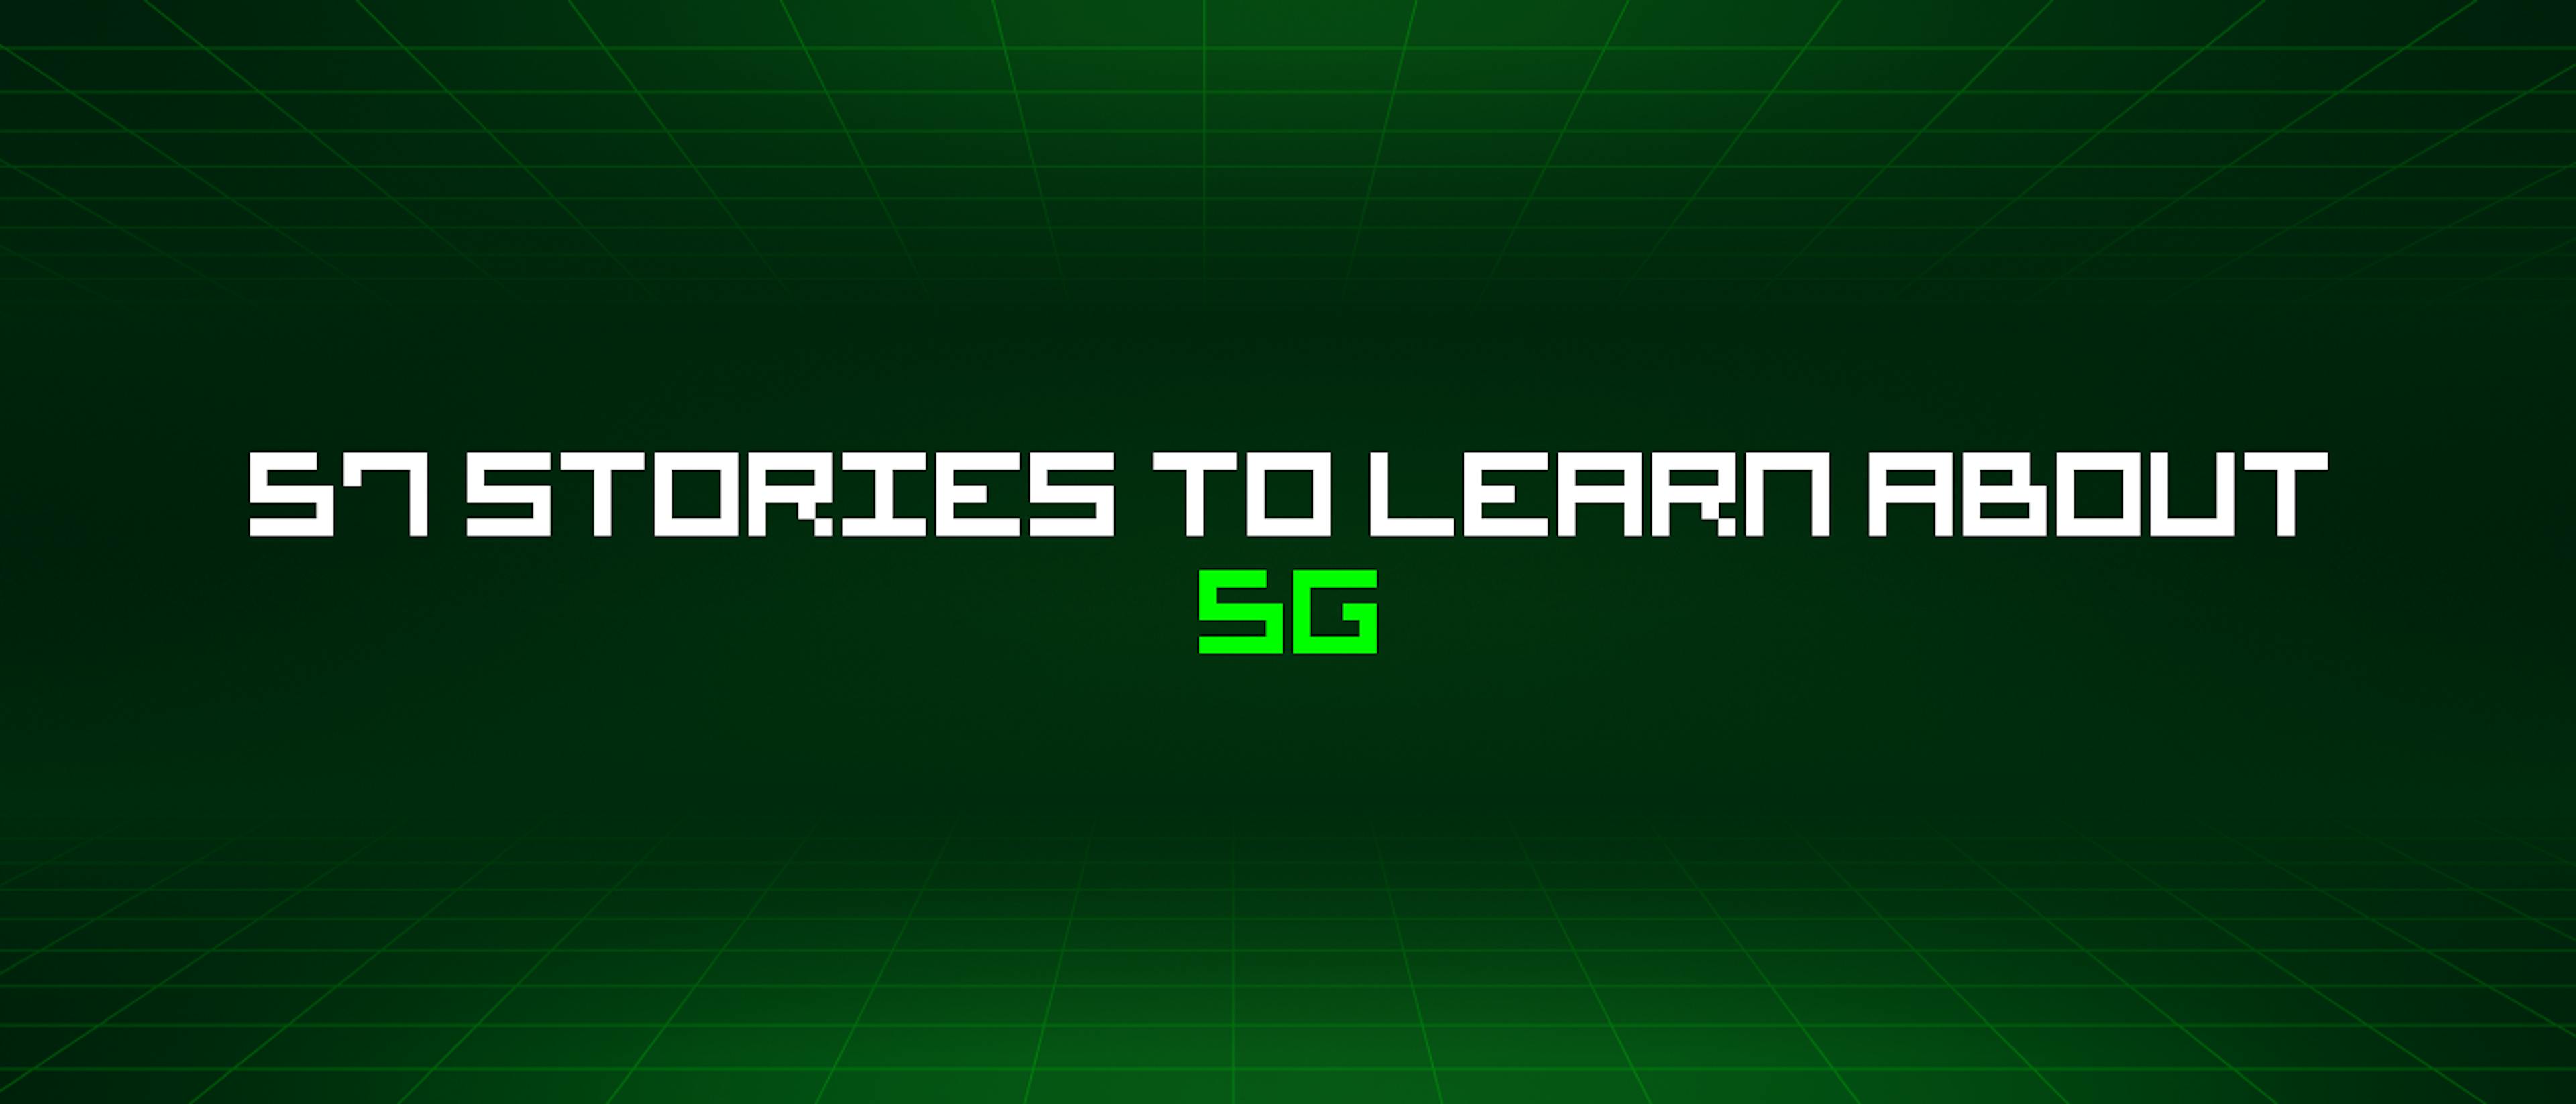 featured image - 57 Stories To Learn About 5g